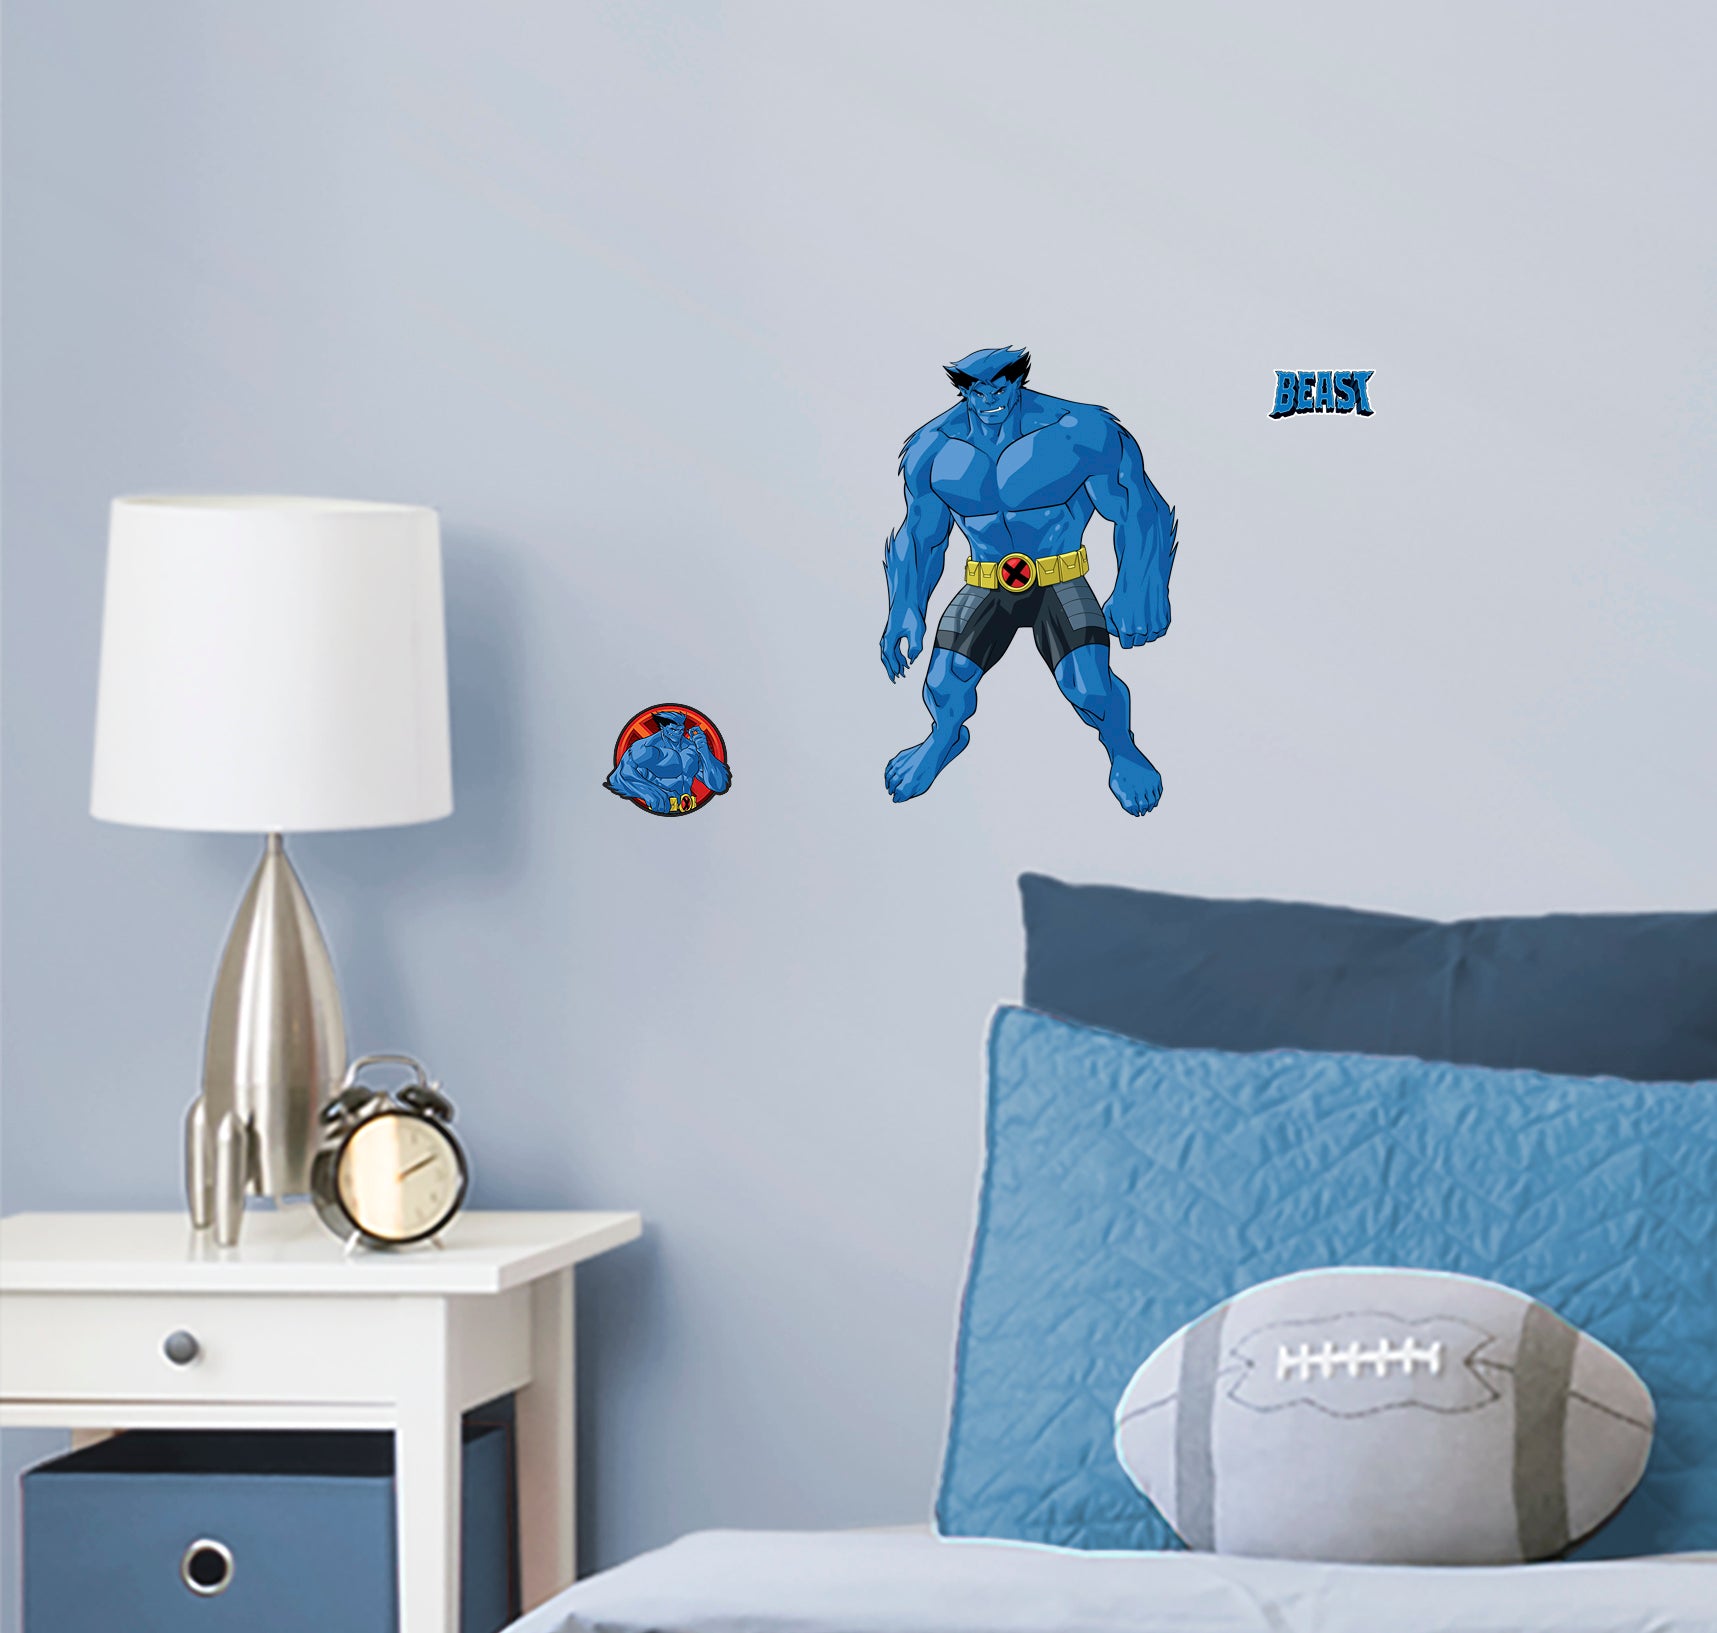 X-Men Beast RealBig - Officially Licensed Marvel Removable Wall Decal Large by Fathead | Vinyl